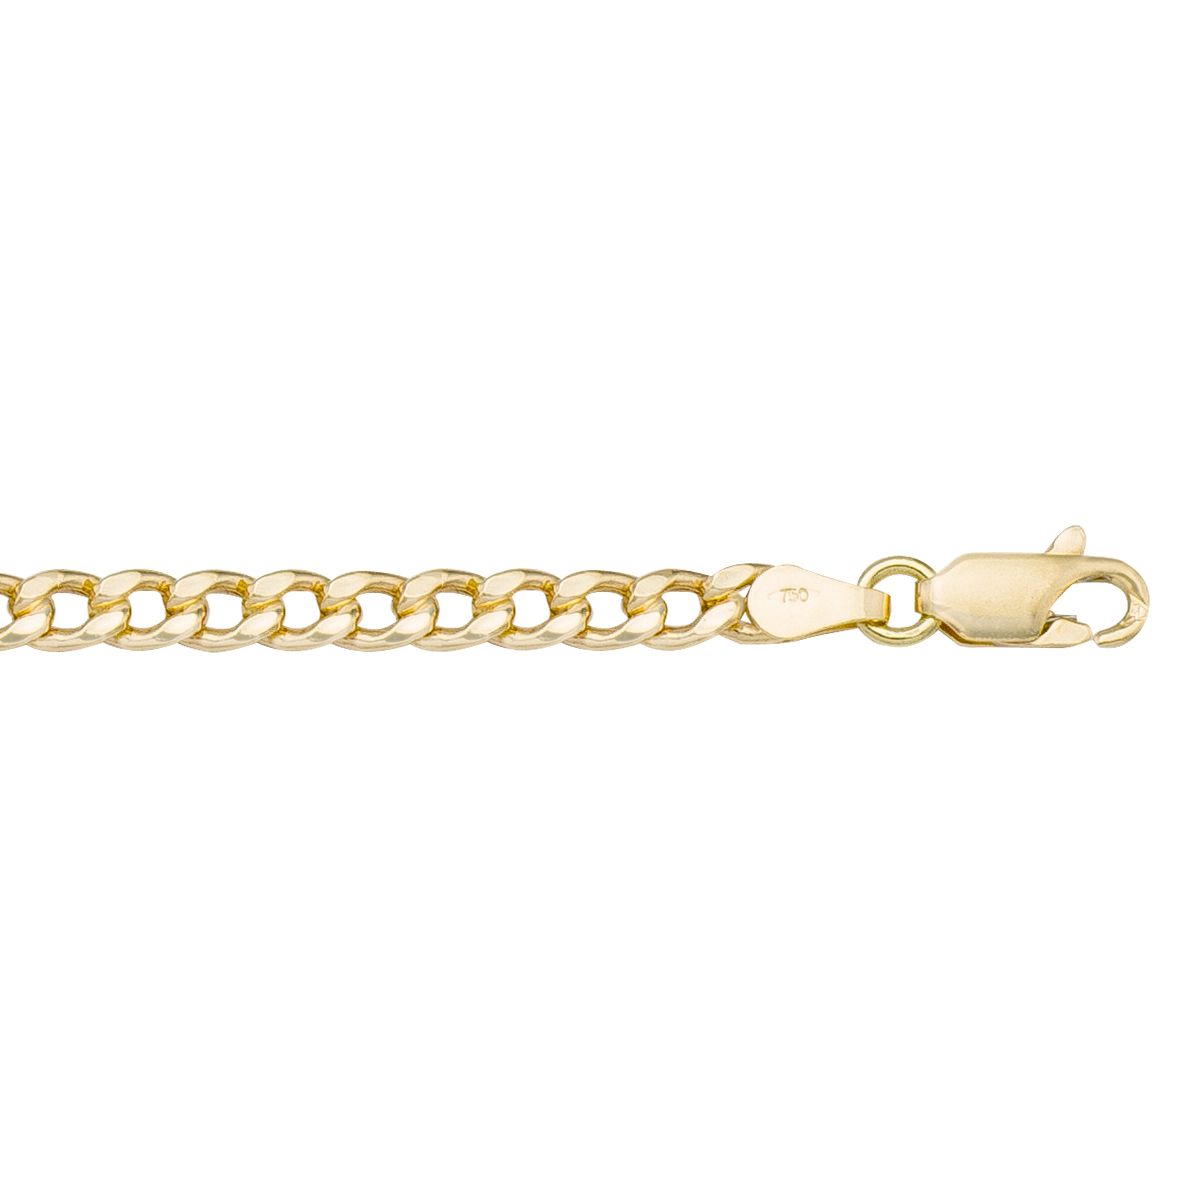 CCRB03, Gold Chain, Hollow Curb, Yellow Gold